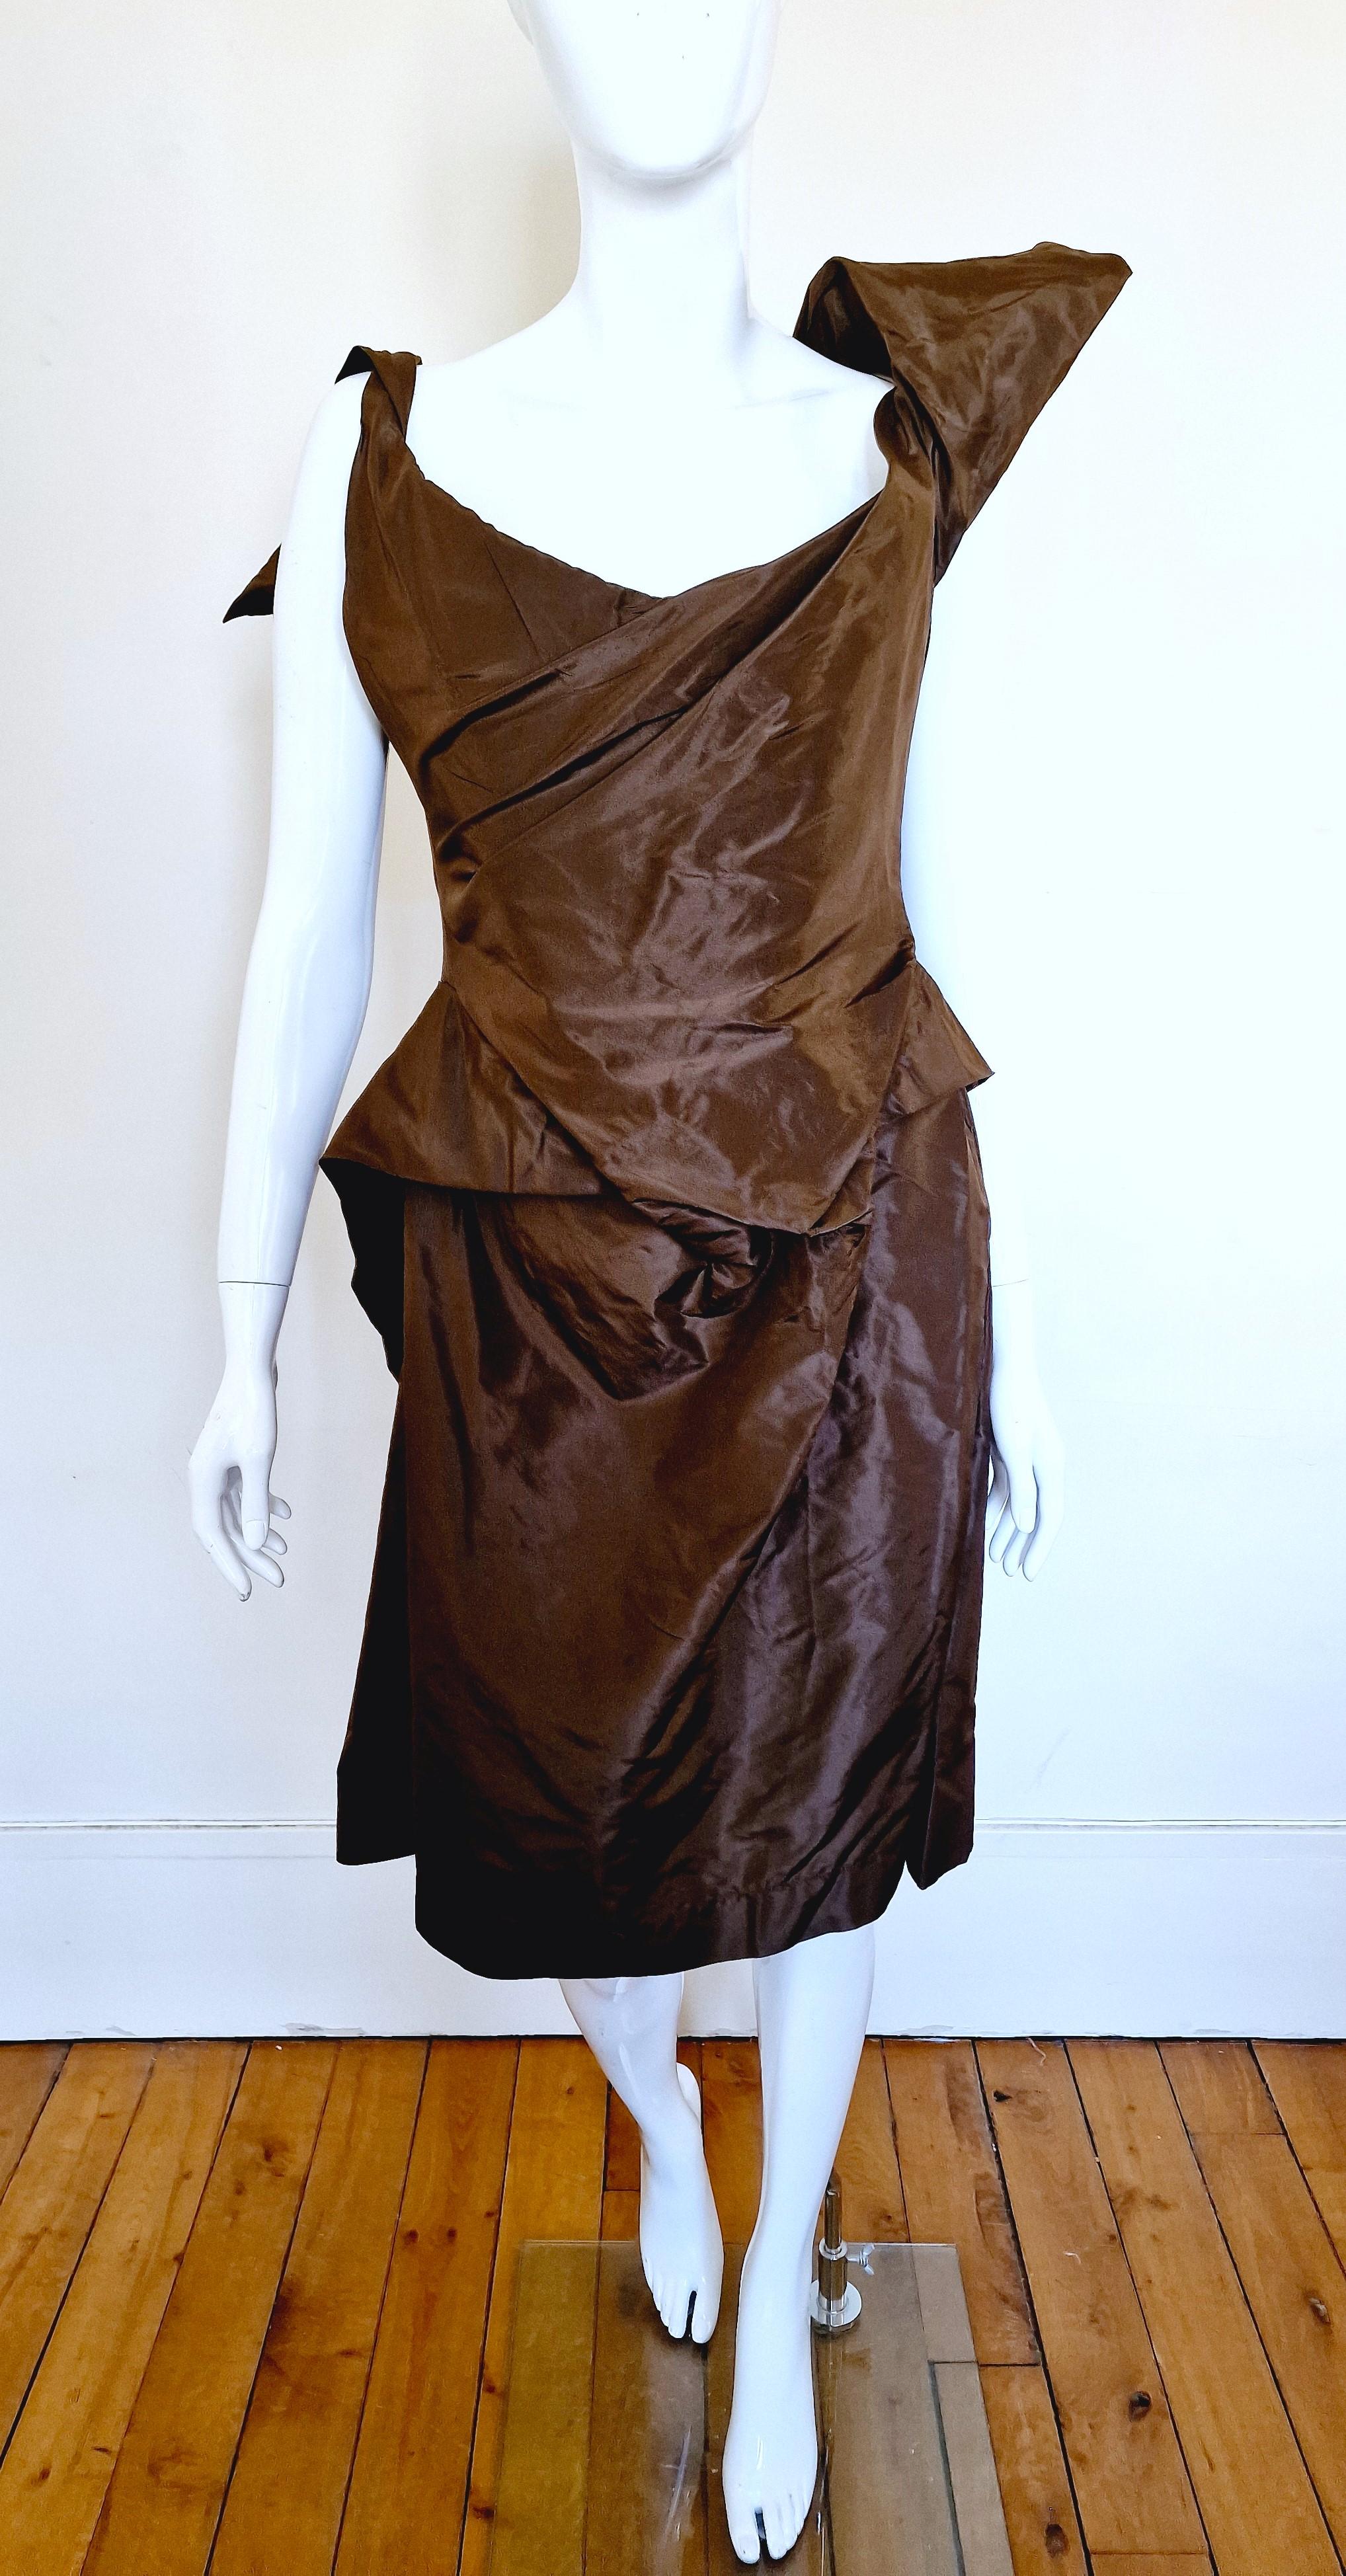 Corset dress by Vivienne Westwood!
Wonderful silhouette!
Sharp shuolders!
Fully lined.

EXCELLENT condition!

SIZE
Large.
Makred size: UK14 / US12 / FR42 / I44.
Length: 109 cm / 42.9 inch
Bust: 43 cm / 16.9 inch
Waist: 36 cm / 14.2 inch
Hips: 59 cm